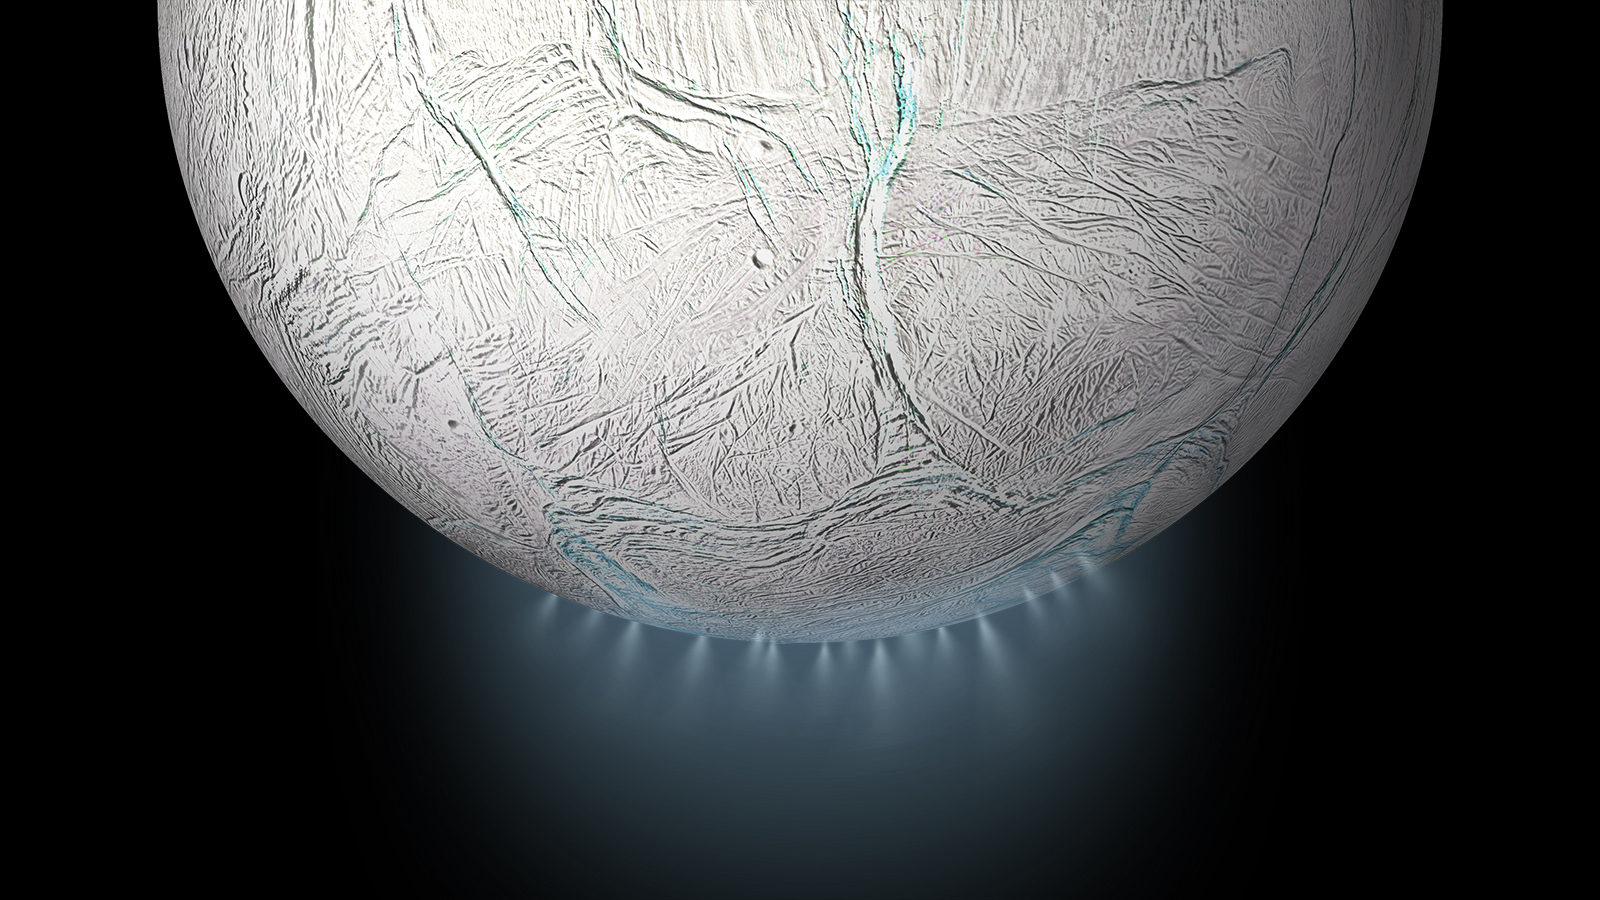 Ocean of Enceladus may be sufficiently ancient that it was life